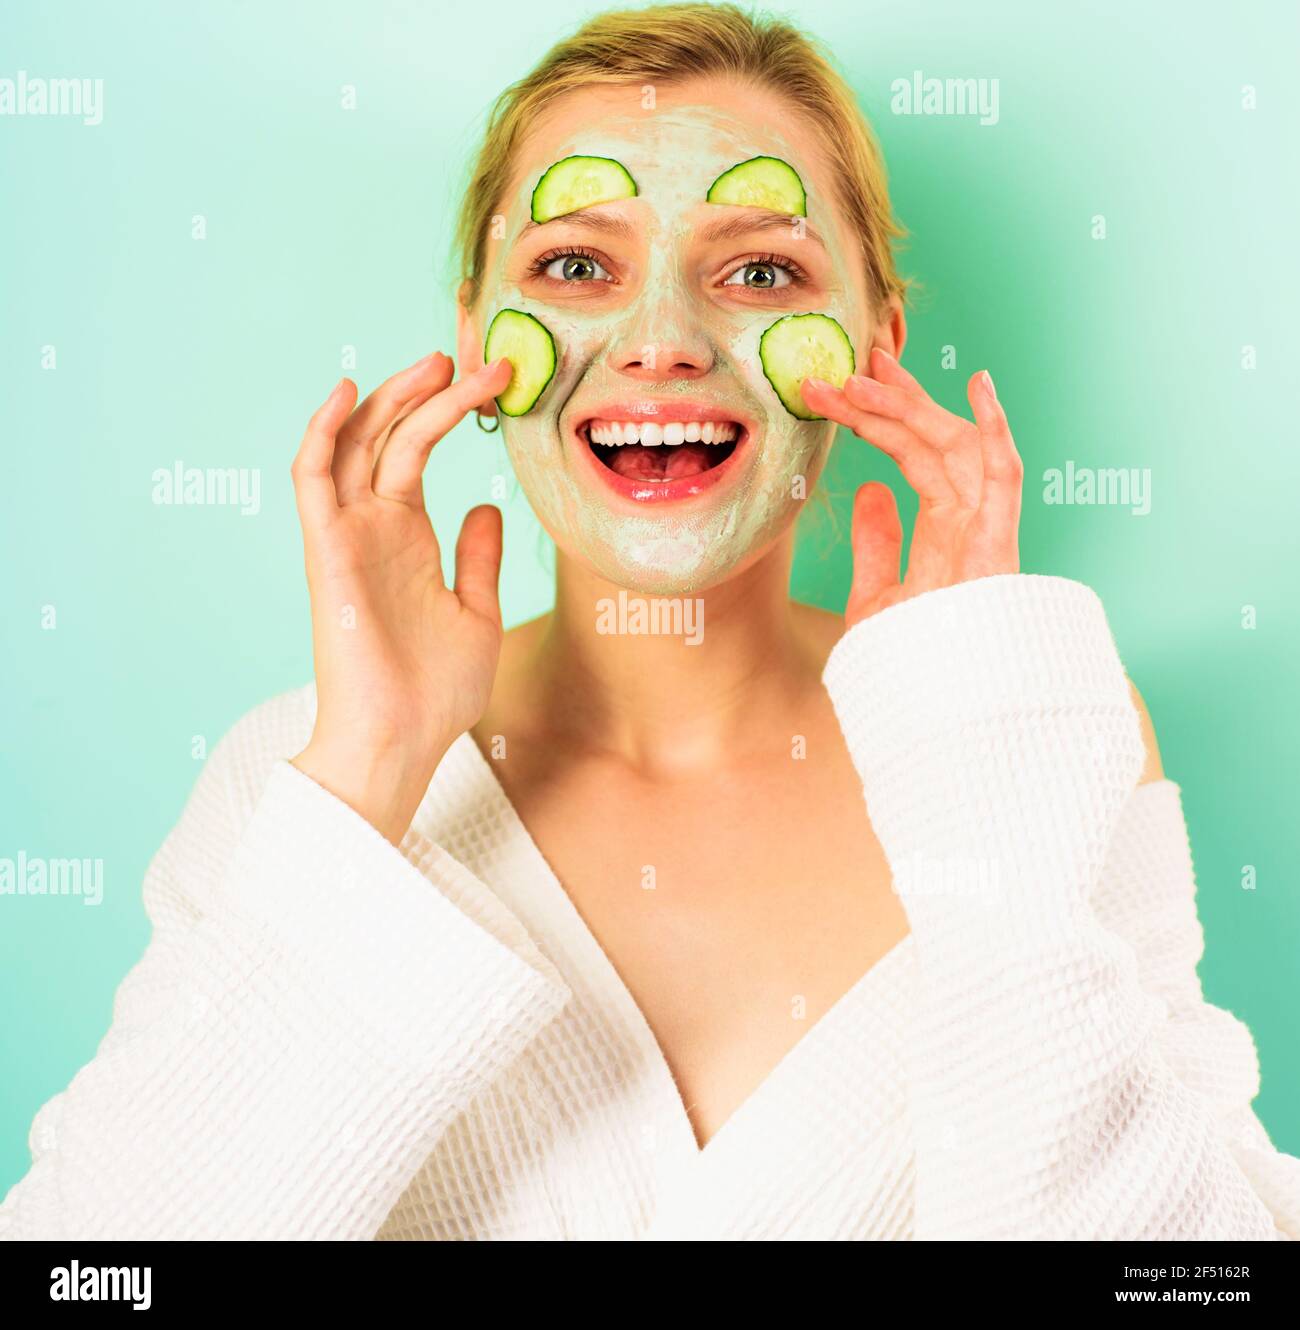 Smiling Woman with cosmetic mask on face. Happy girl with facial mask. Beauty treatment. Spa therapy. Cosmetic procedures. Stock Photo